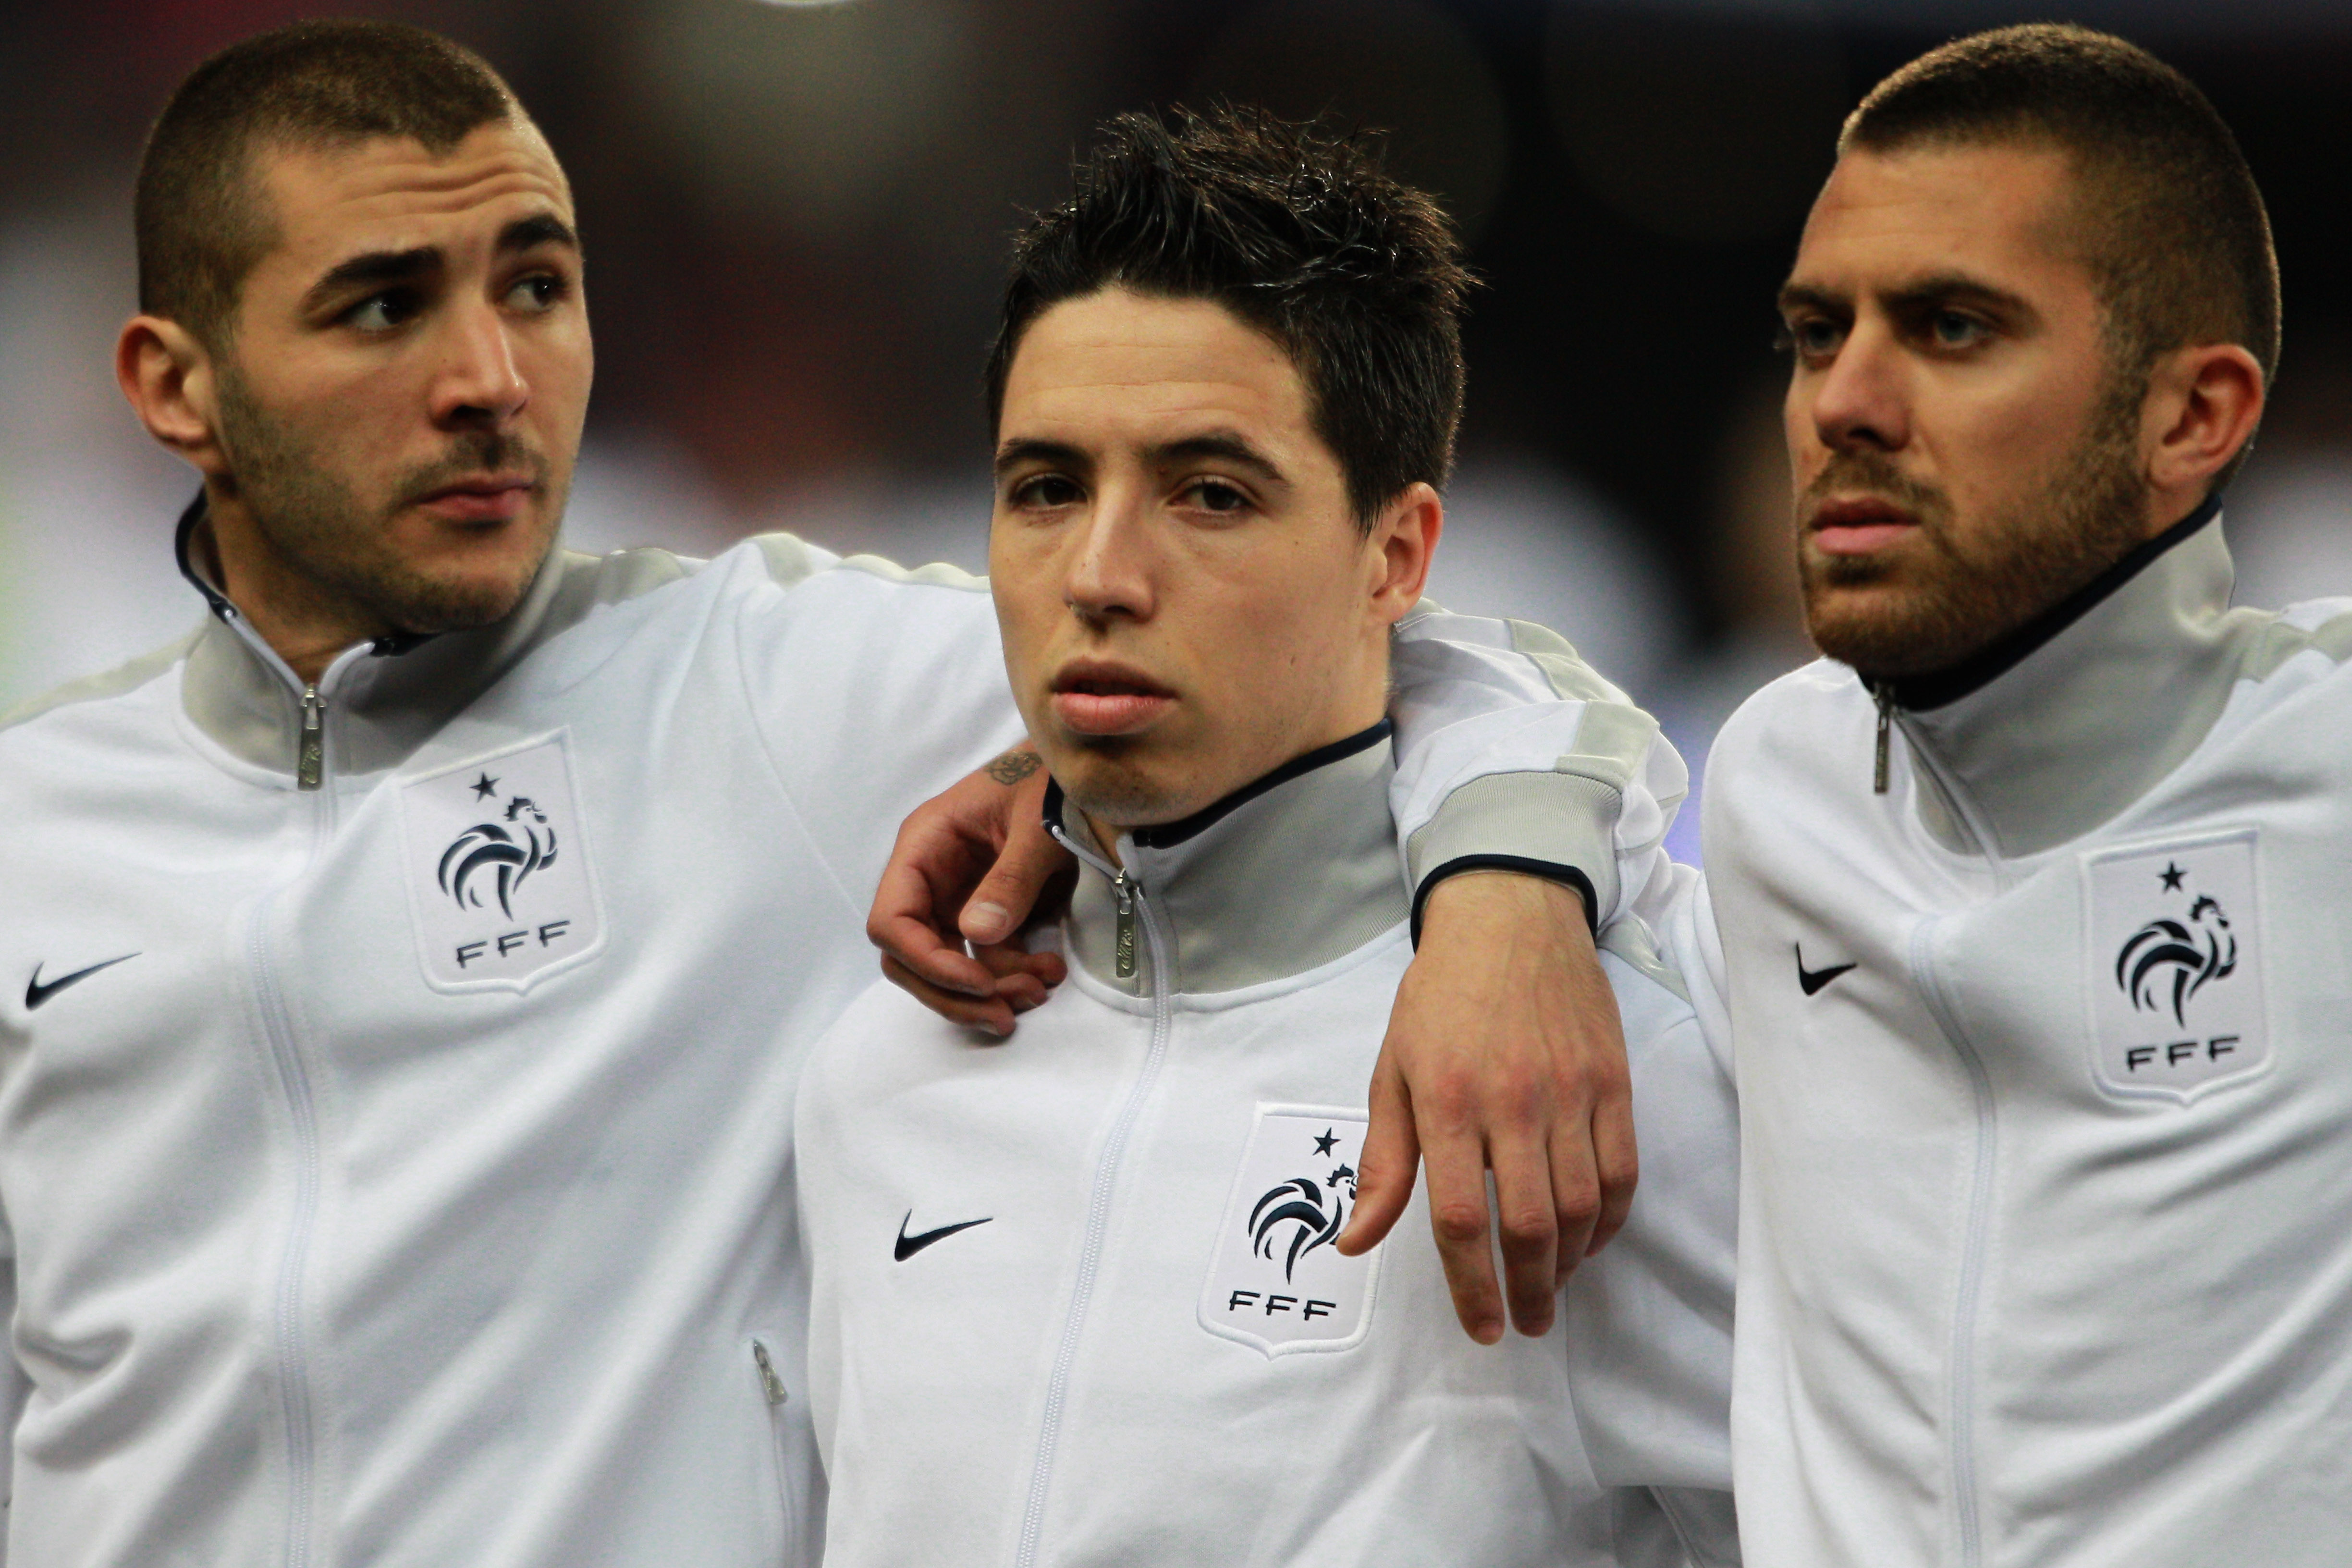 PARIS, FRANCE - MARCH 29:  (L-R)  Karim Benzema, Samir Nasri and Jeremy Menez of France stand for the national anthem during the International friendly match between France and Croatia at Stade de France on March 29, 2011 in Paris, France.  (Photo by Dean